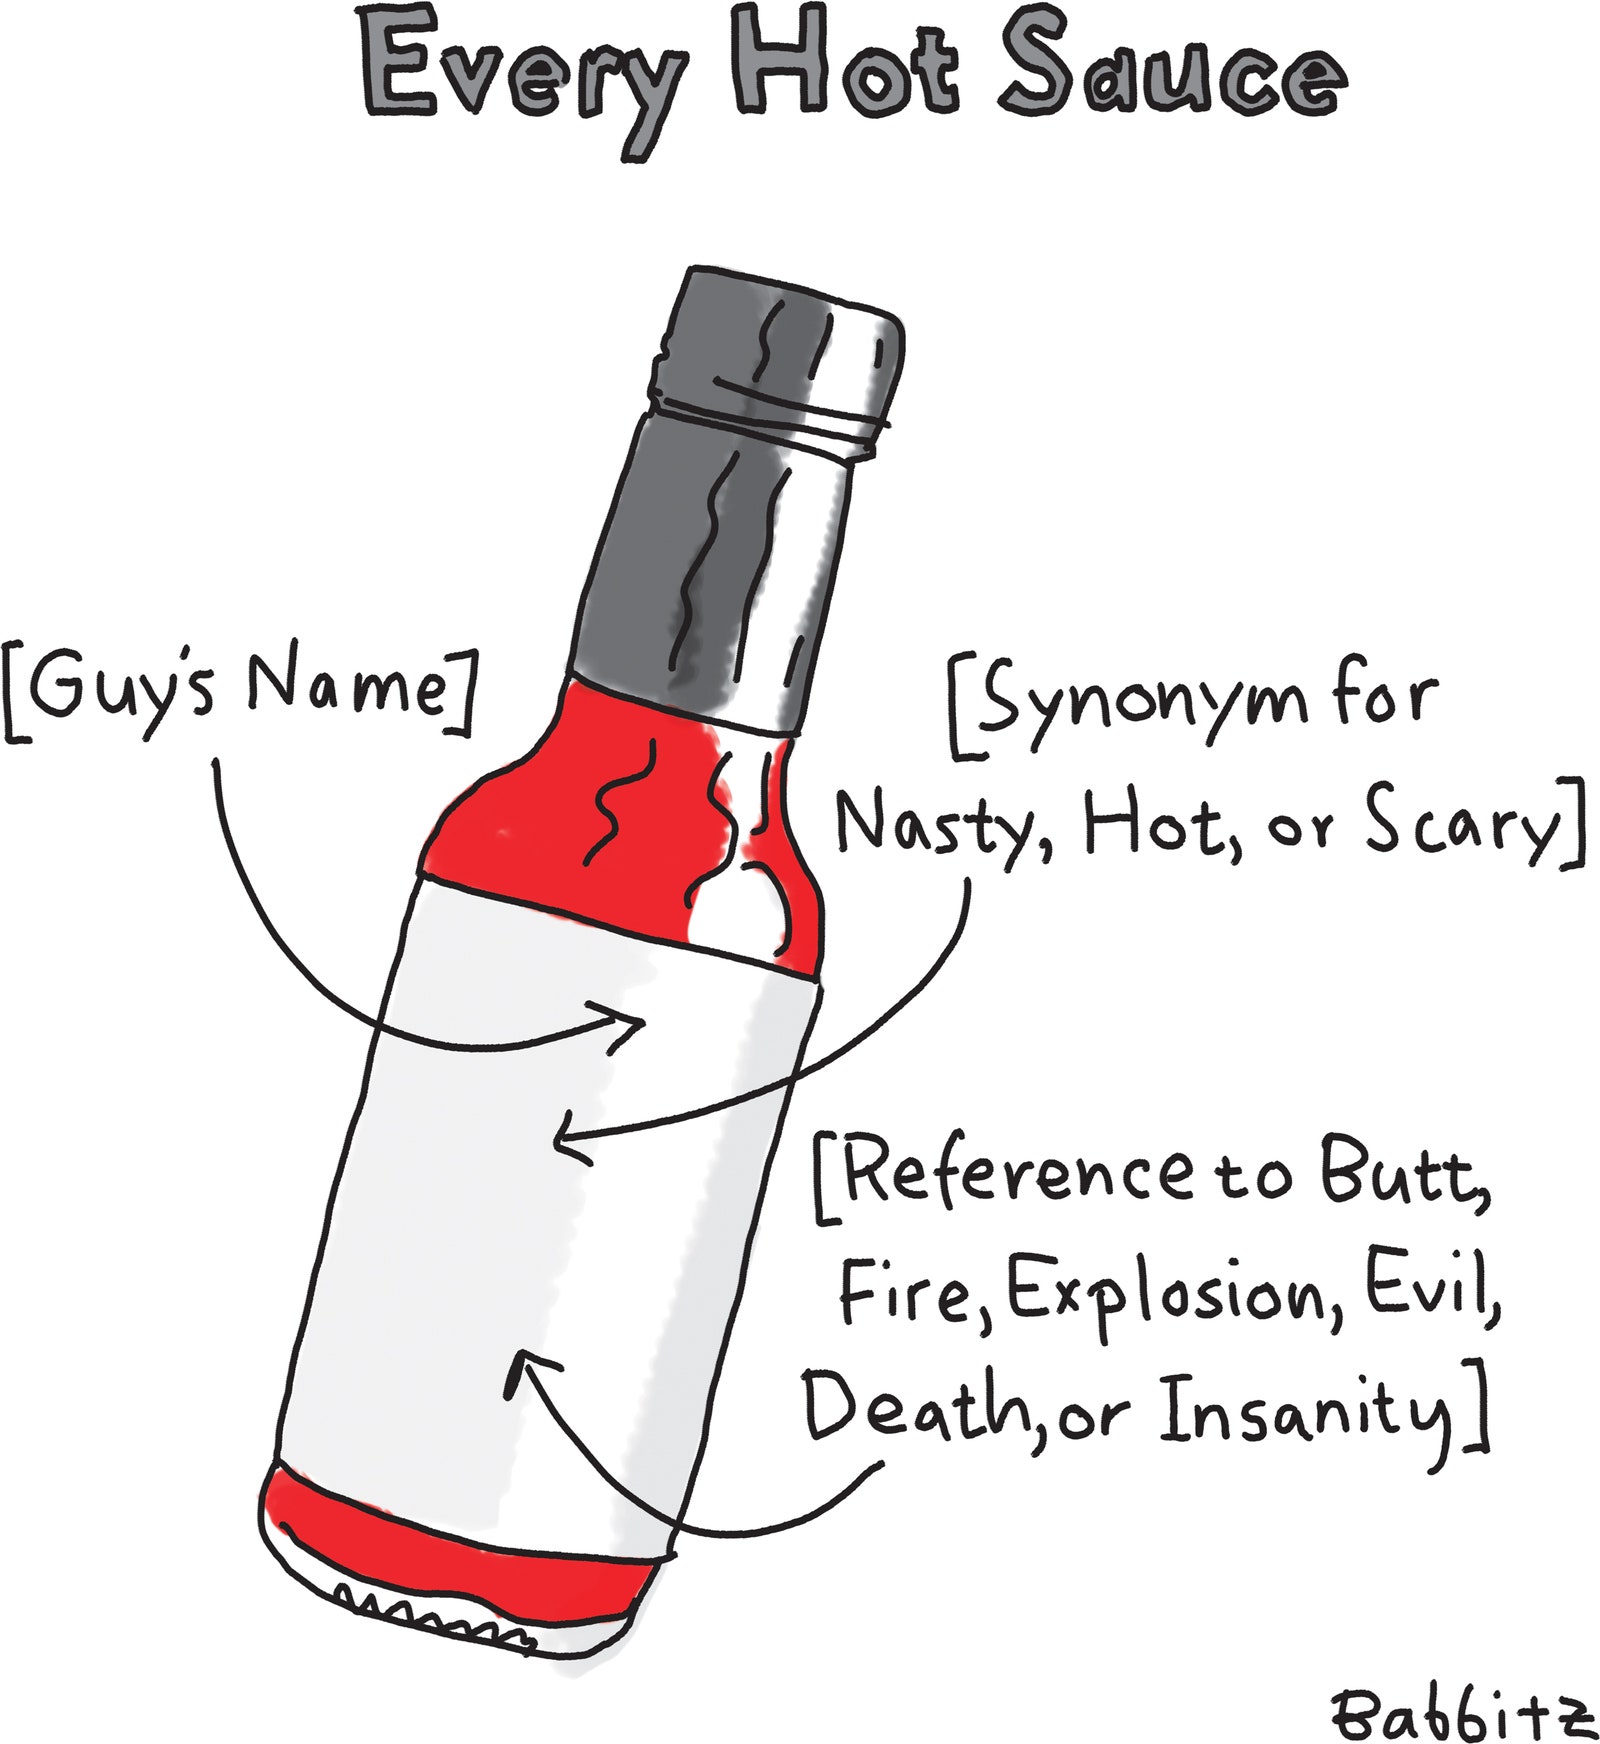 Diagram of the typical hot sauce labels.